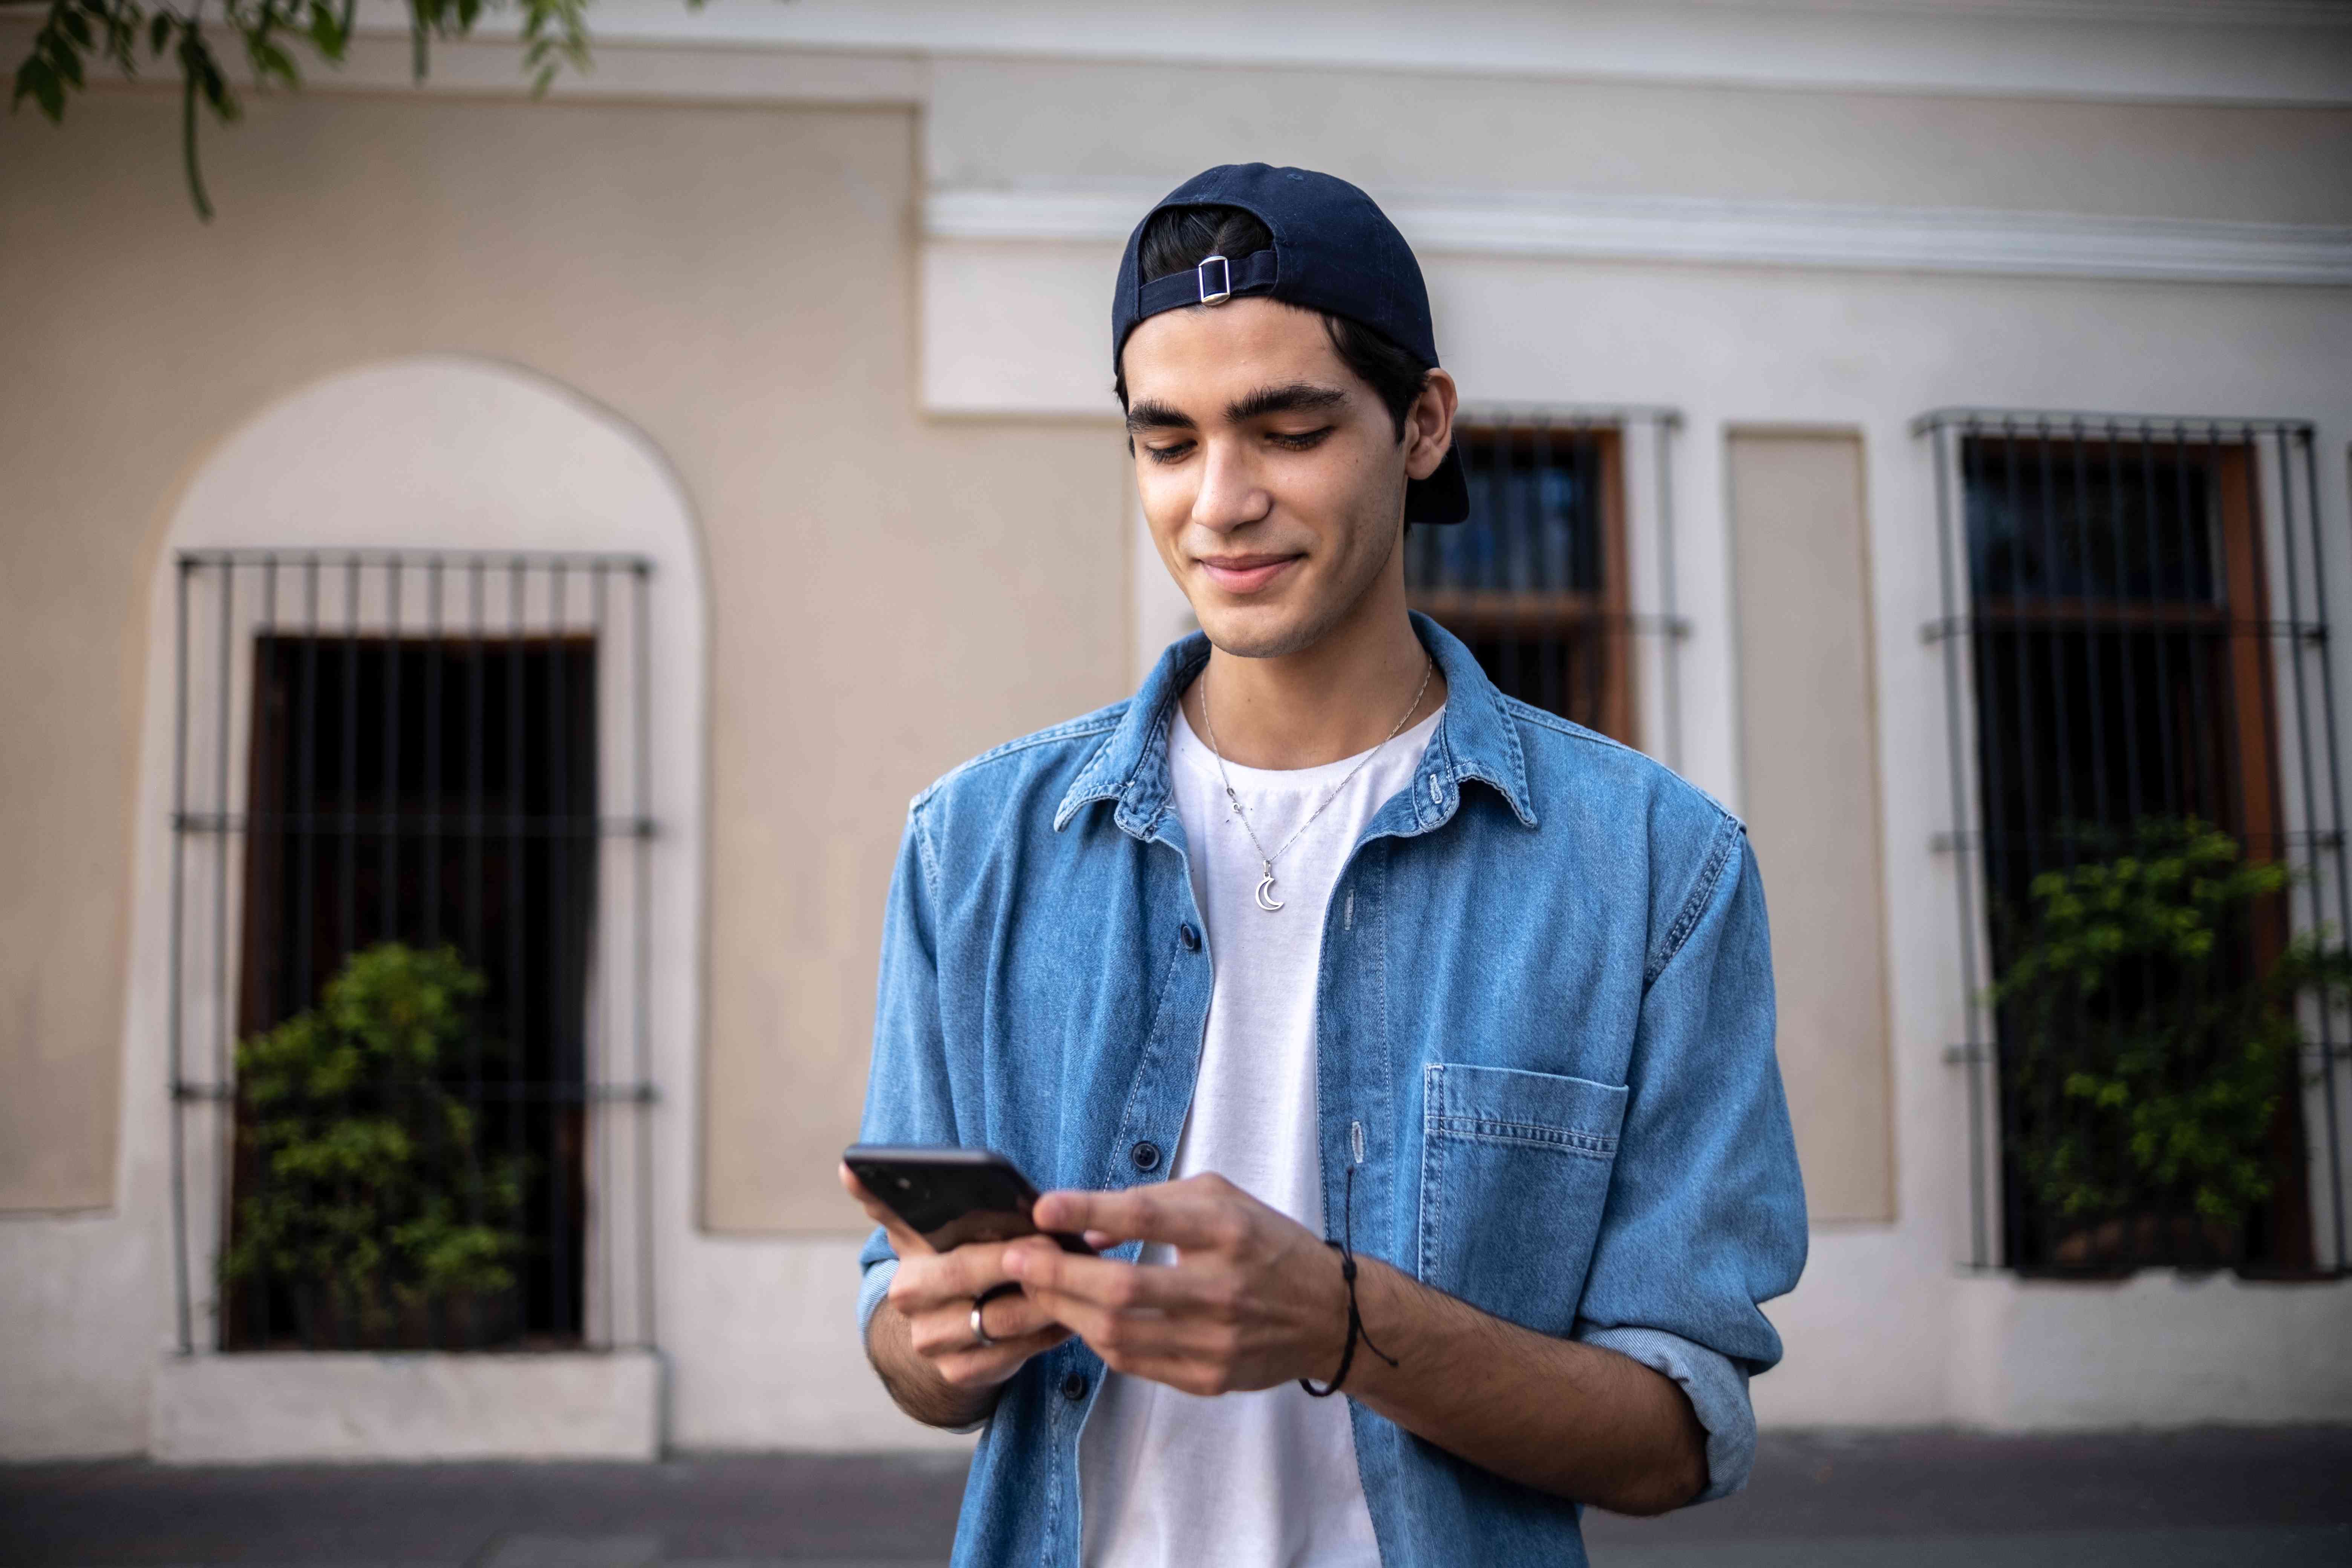 Young latino man smiling as he looks at his smartphone